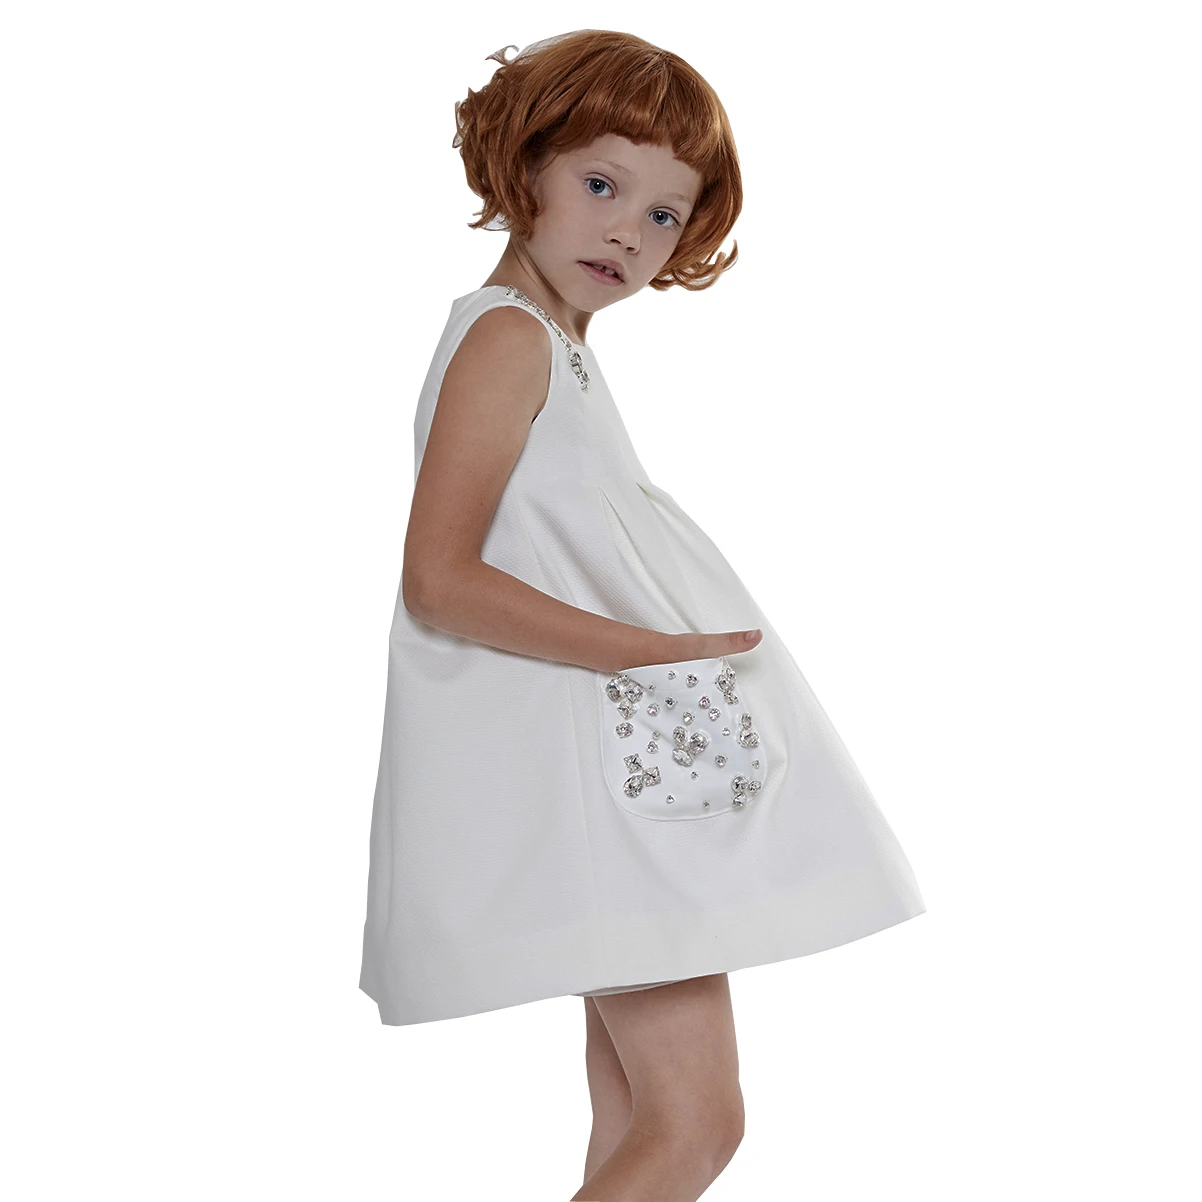 New arrival fashion simple design white color girl dress baby children girl dress with pockets dress for girl 2-10 year